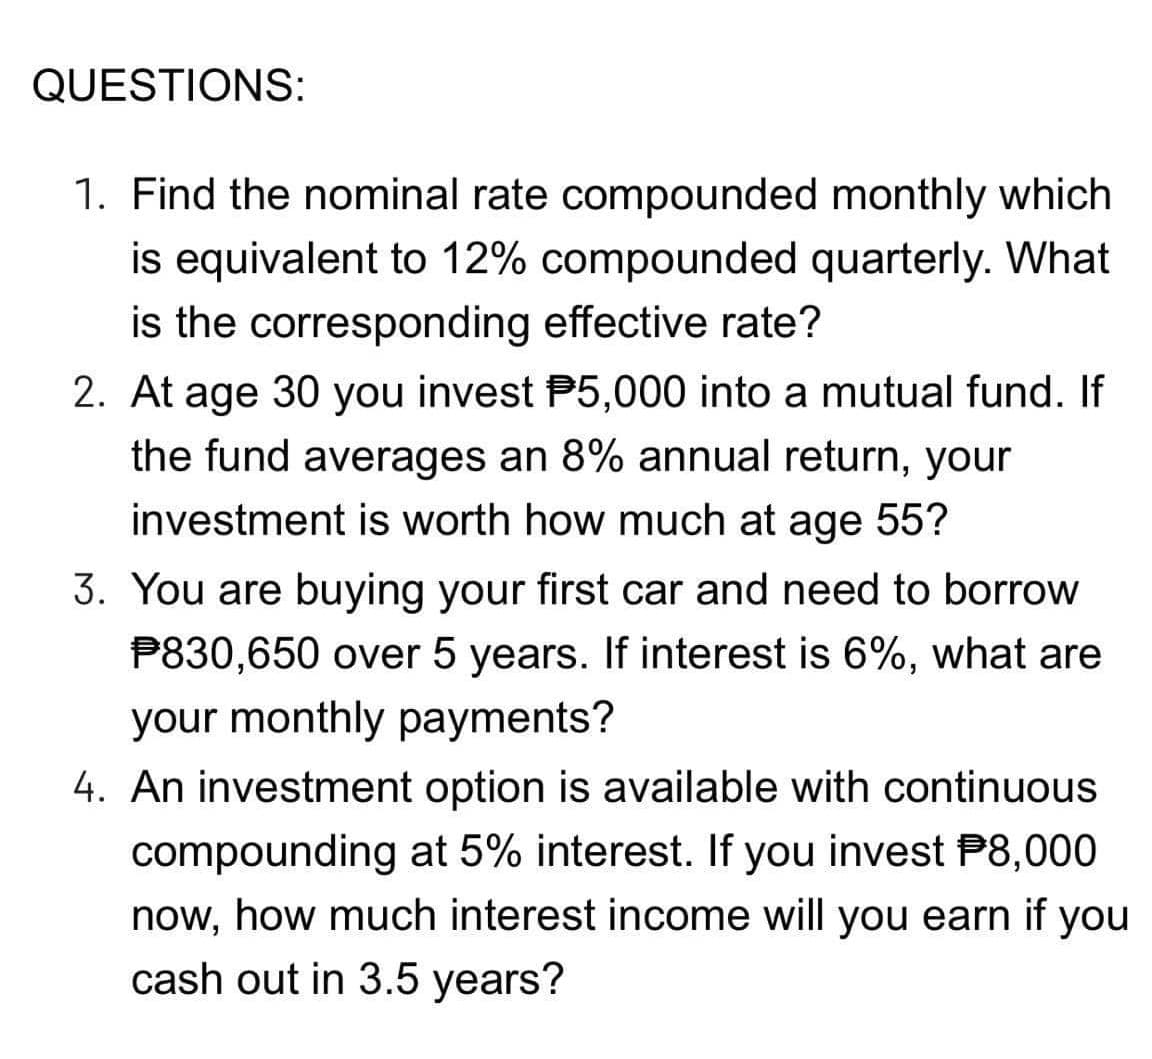 QUESTIONS:
1. Find the nominal rate compounded monthly which
is equivalent to 12% compounded quarterly. What
is the corresponding effective rate?
2. At age 30 you invest P5,000 into a mutual fund. If
the fund averages an 8% annual return, your
investment is worth how much at age 55?
3. You are buying your first car and need to borrow
P830,650 over 5 years. If interest is 6%, what are
your monthly payments?
4. An investment option is available with continuous
compounding at 5% interest. If you invest P8,000
now, how much interest income will you earn if you
cash out in 3.5 years?
